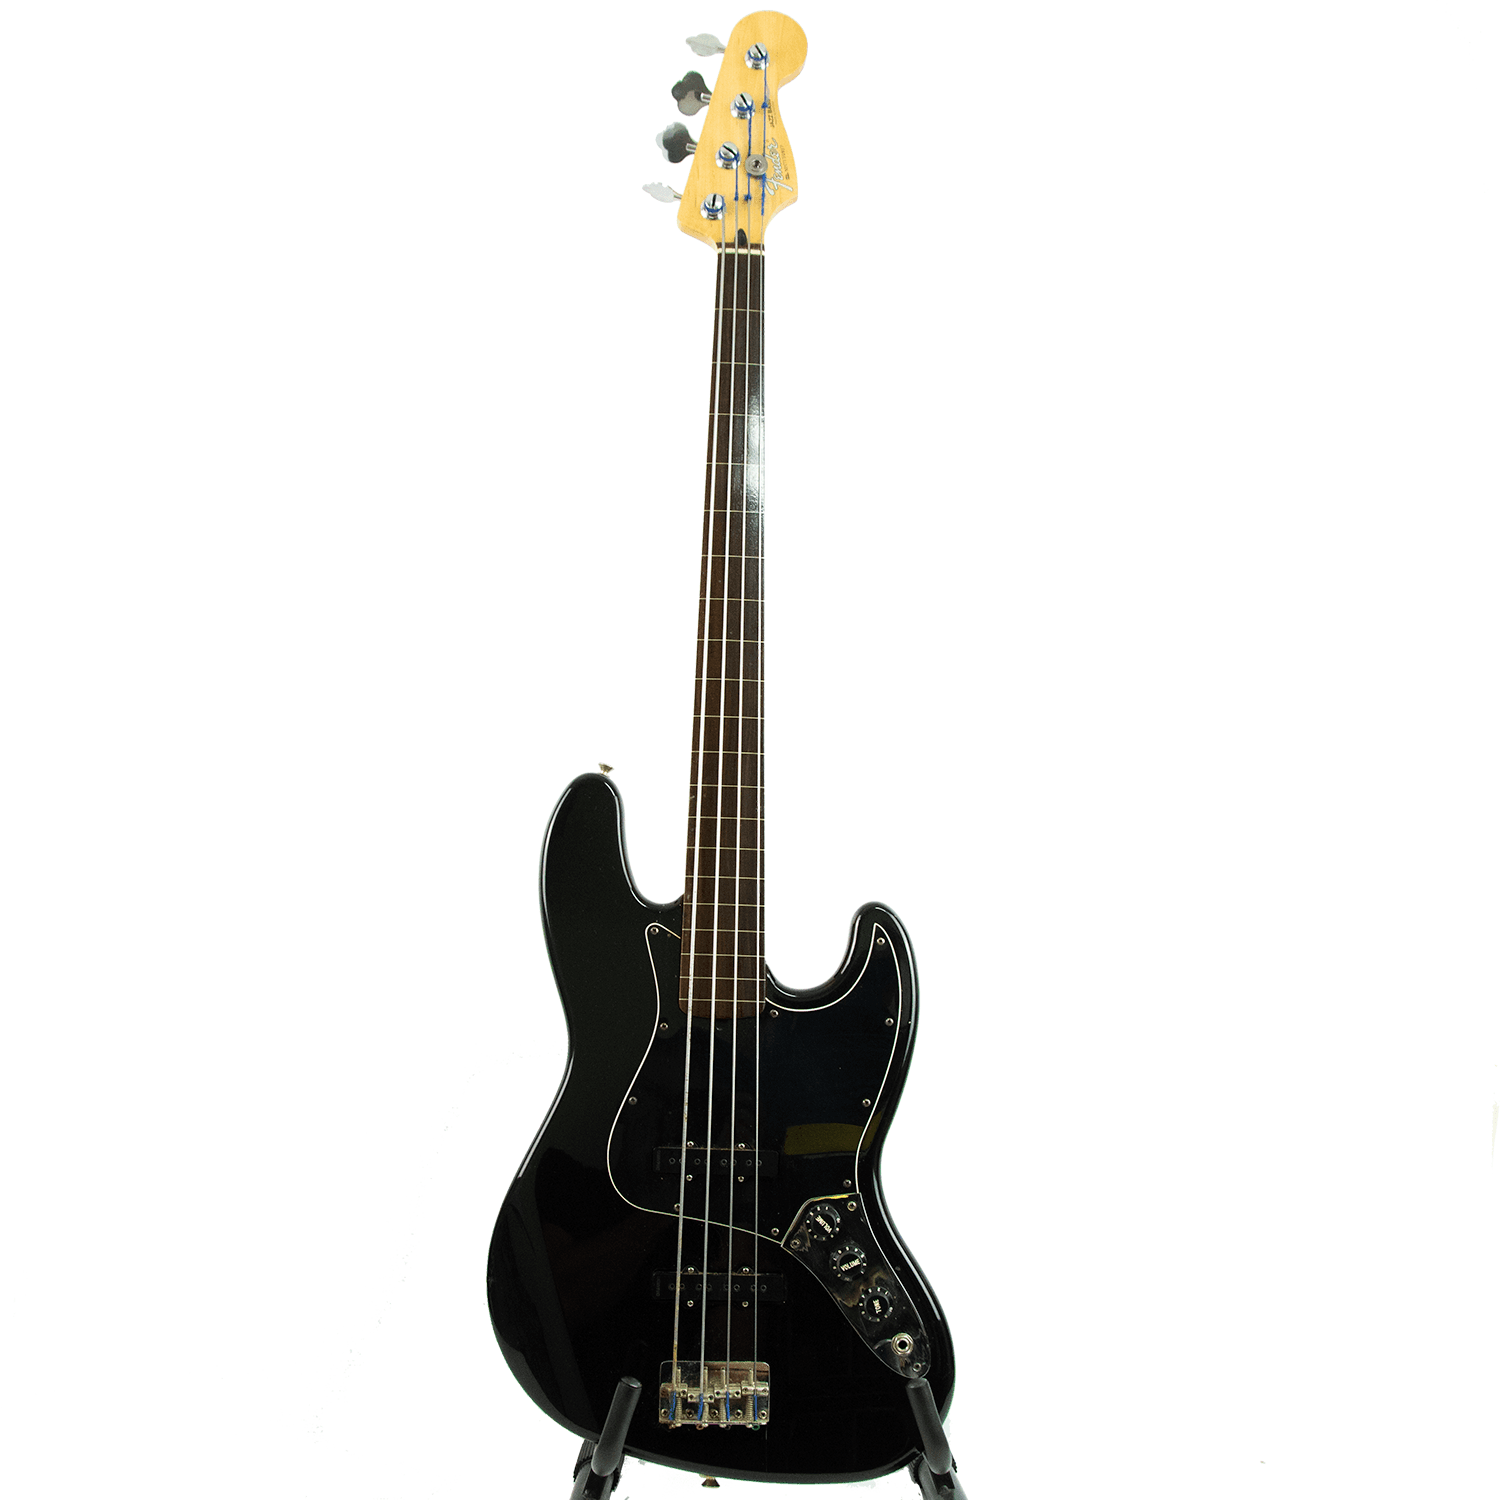 Fender Jazz Bass MIM - Made in Mexico